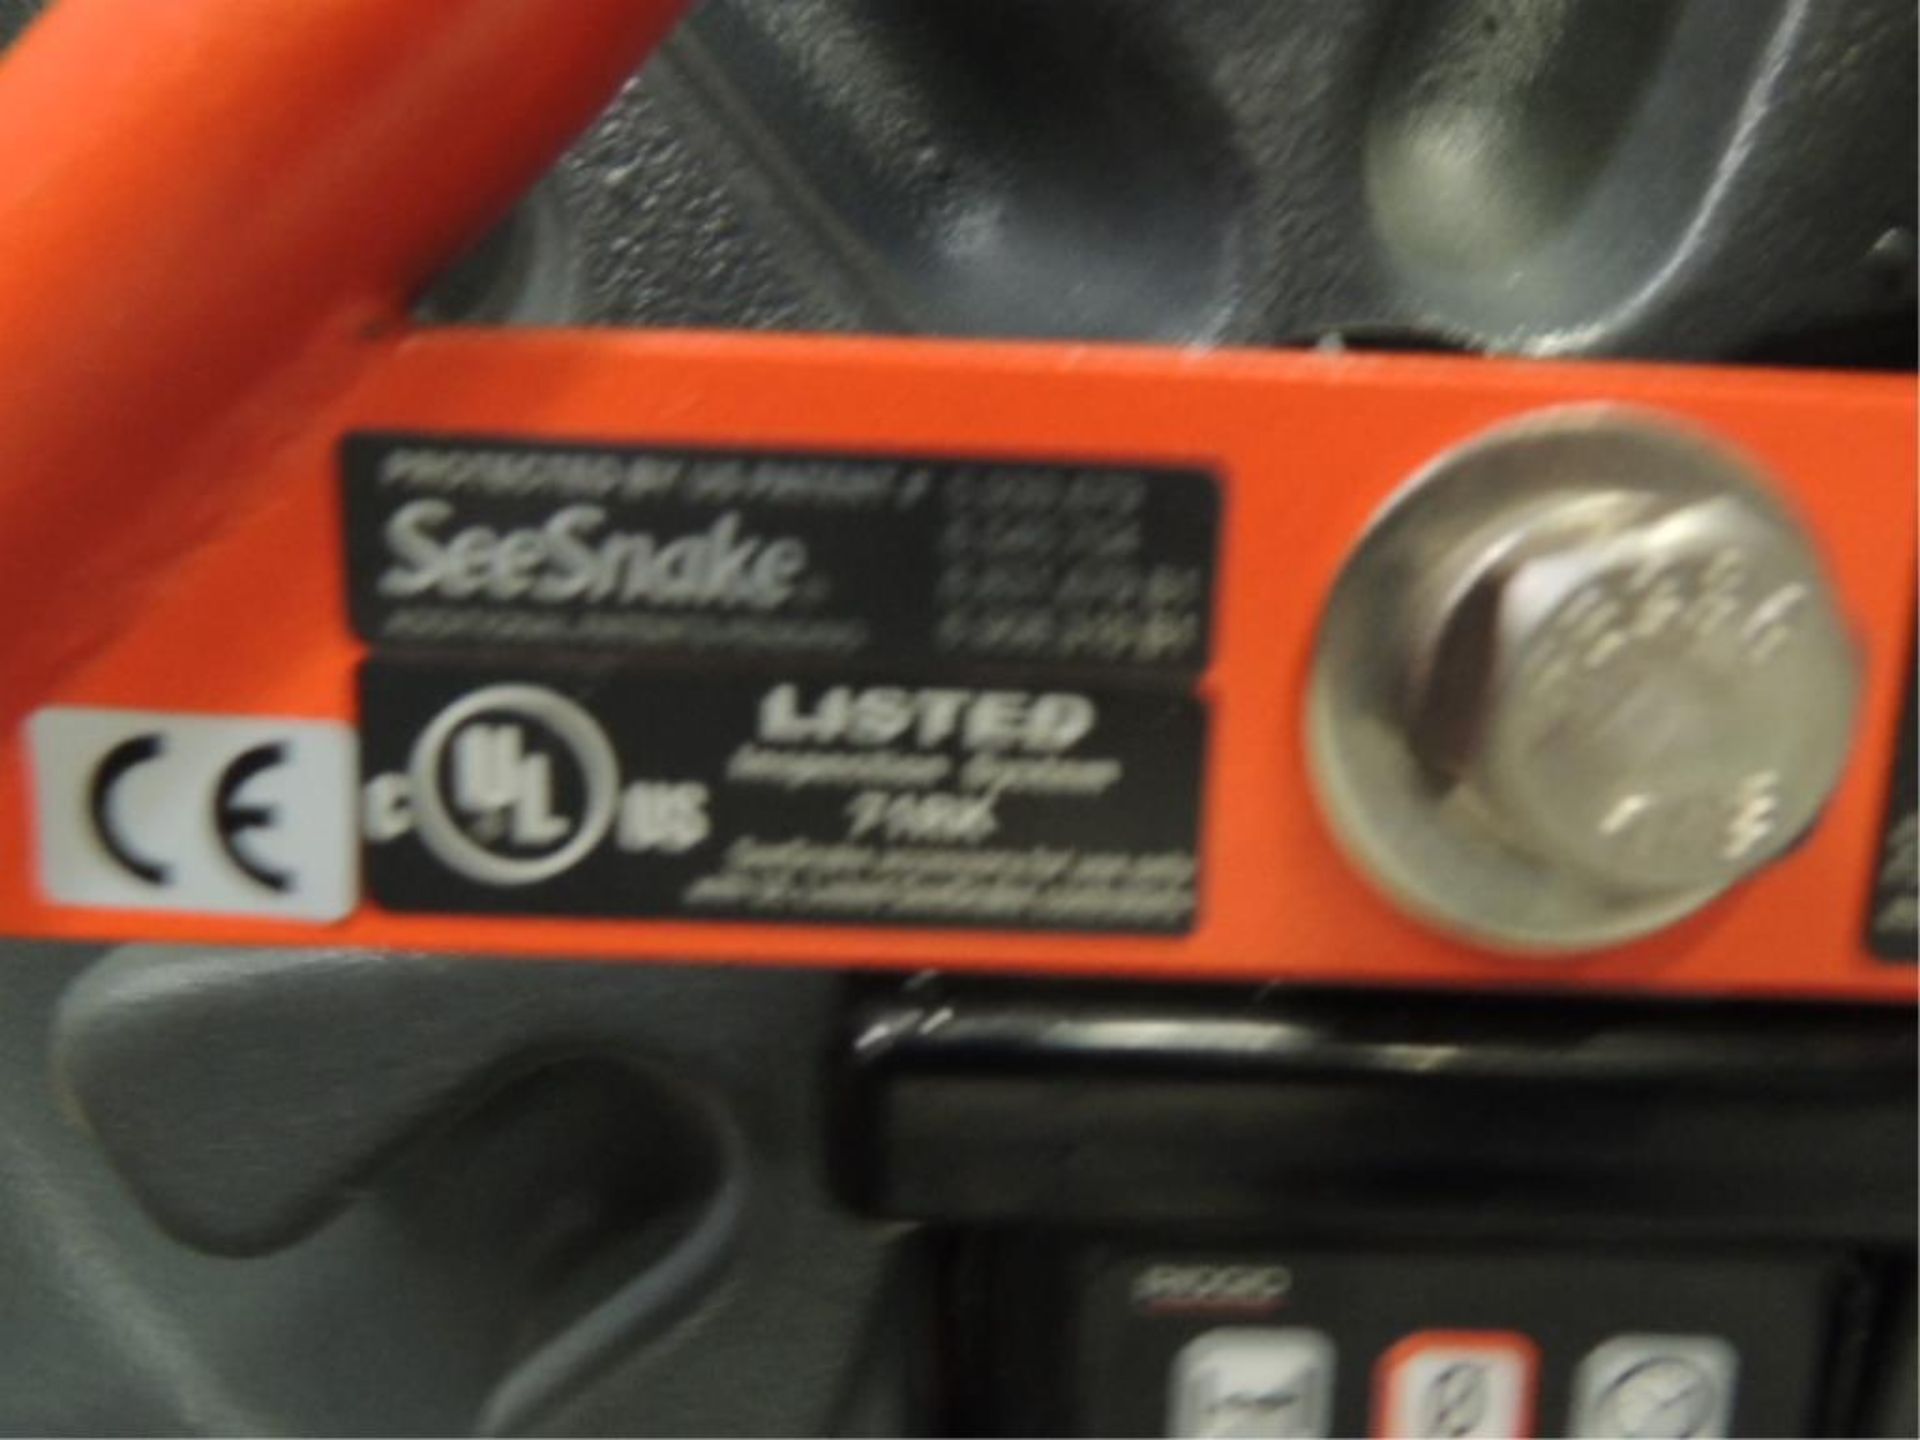 Ridgid 71RK Plumbing; SeeSnake used for clearing clogged lines. SN# 20-032554+9. HIT# 2192513. - Image 5 of 6